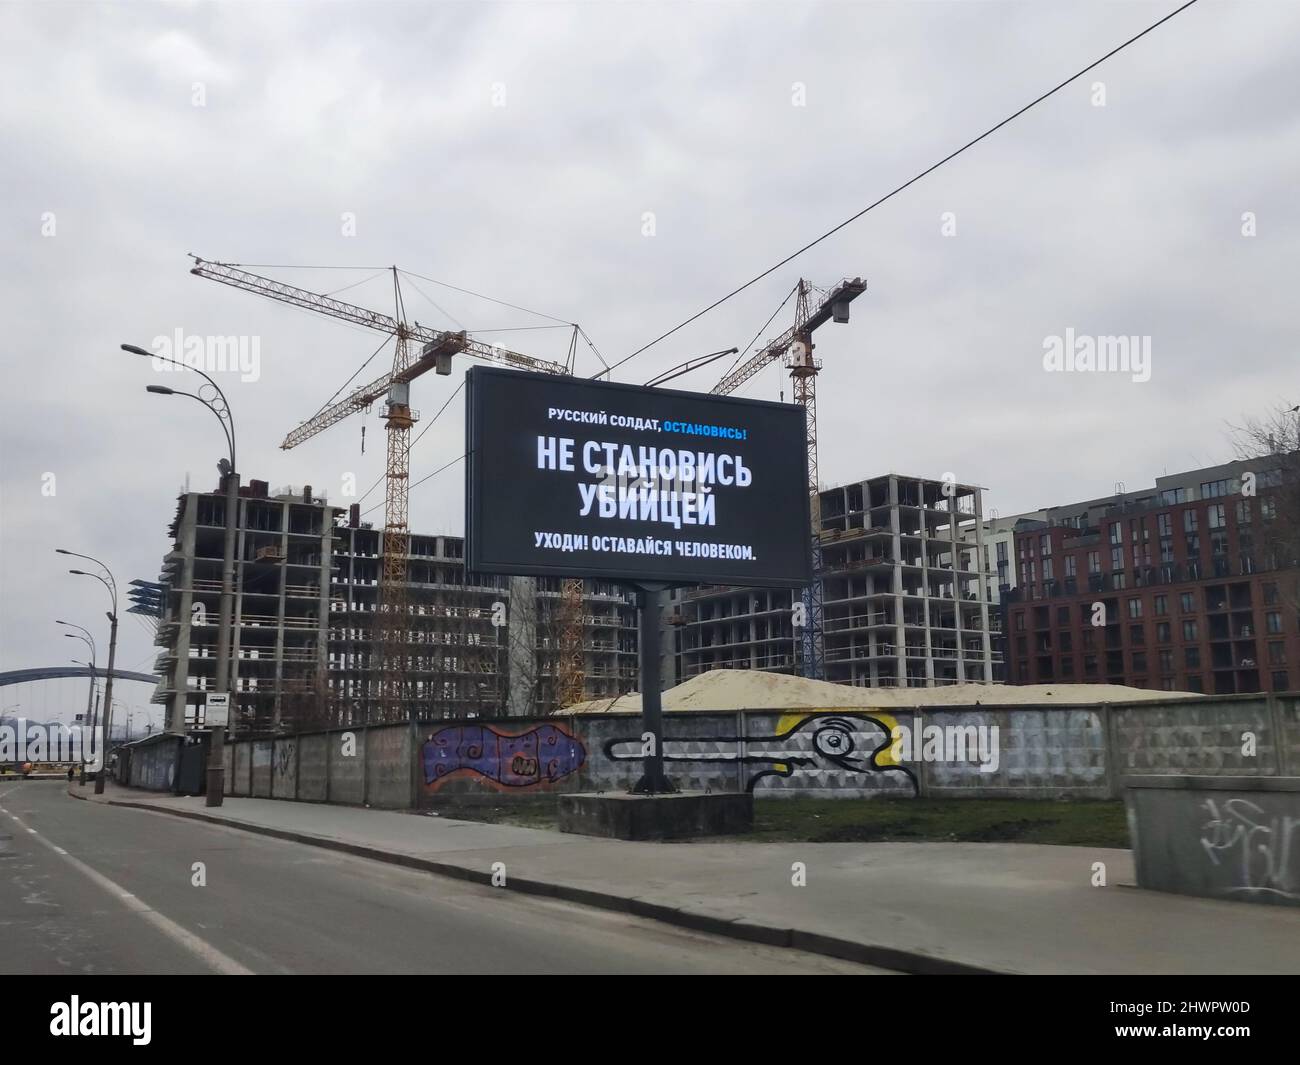 Non Exclusive: KYIV, UKRAINE - MARCH 06, 2022 - Billboard in the city calling for Russian soldiers not to become murderers, Kyiv, capital of Ukraine Stock Photo